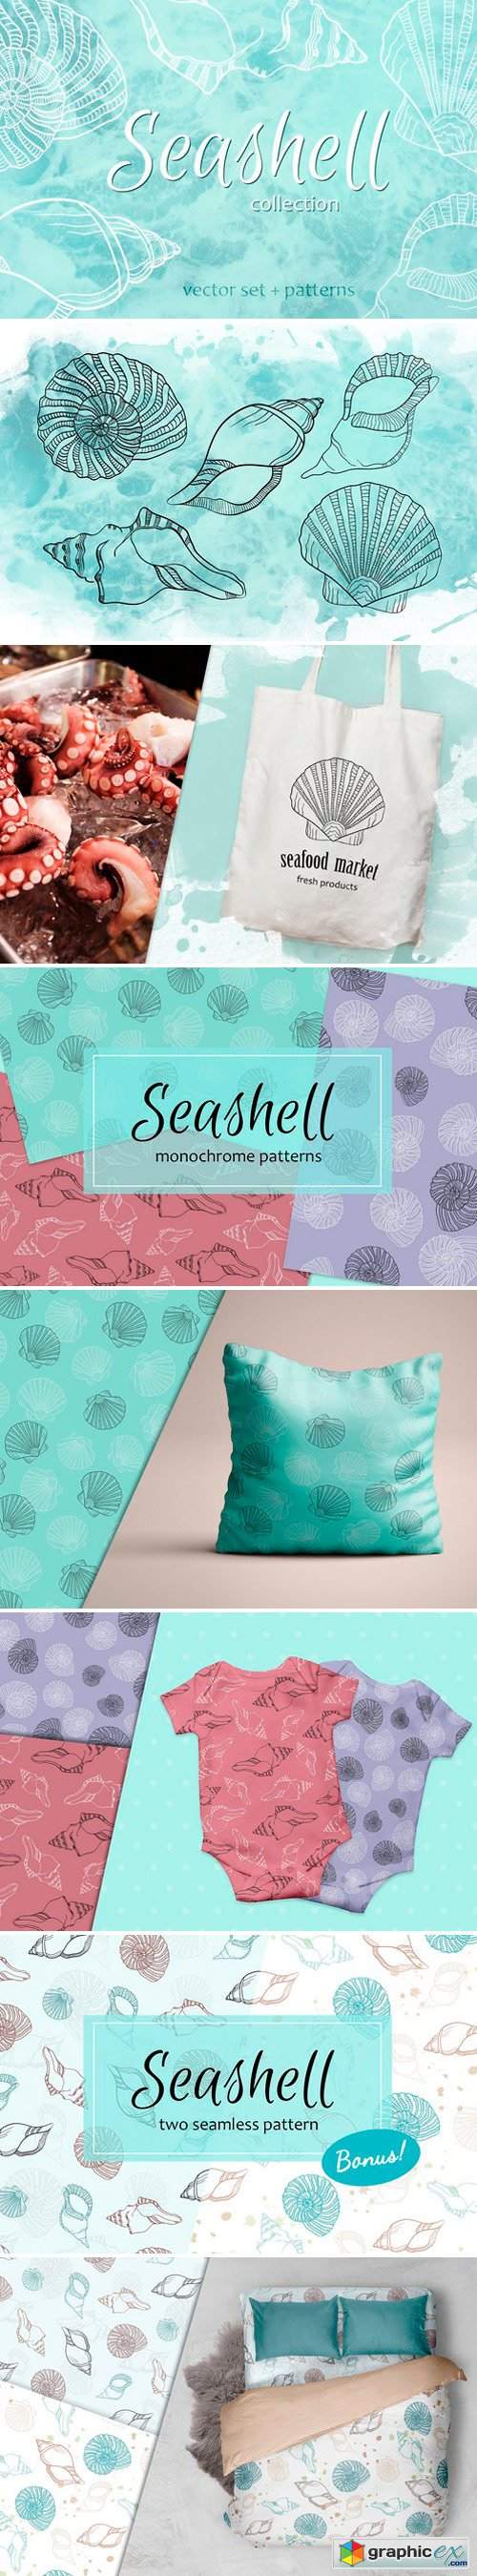 Seashell collection of patterns